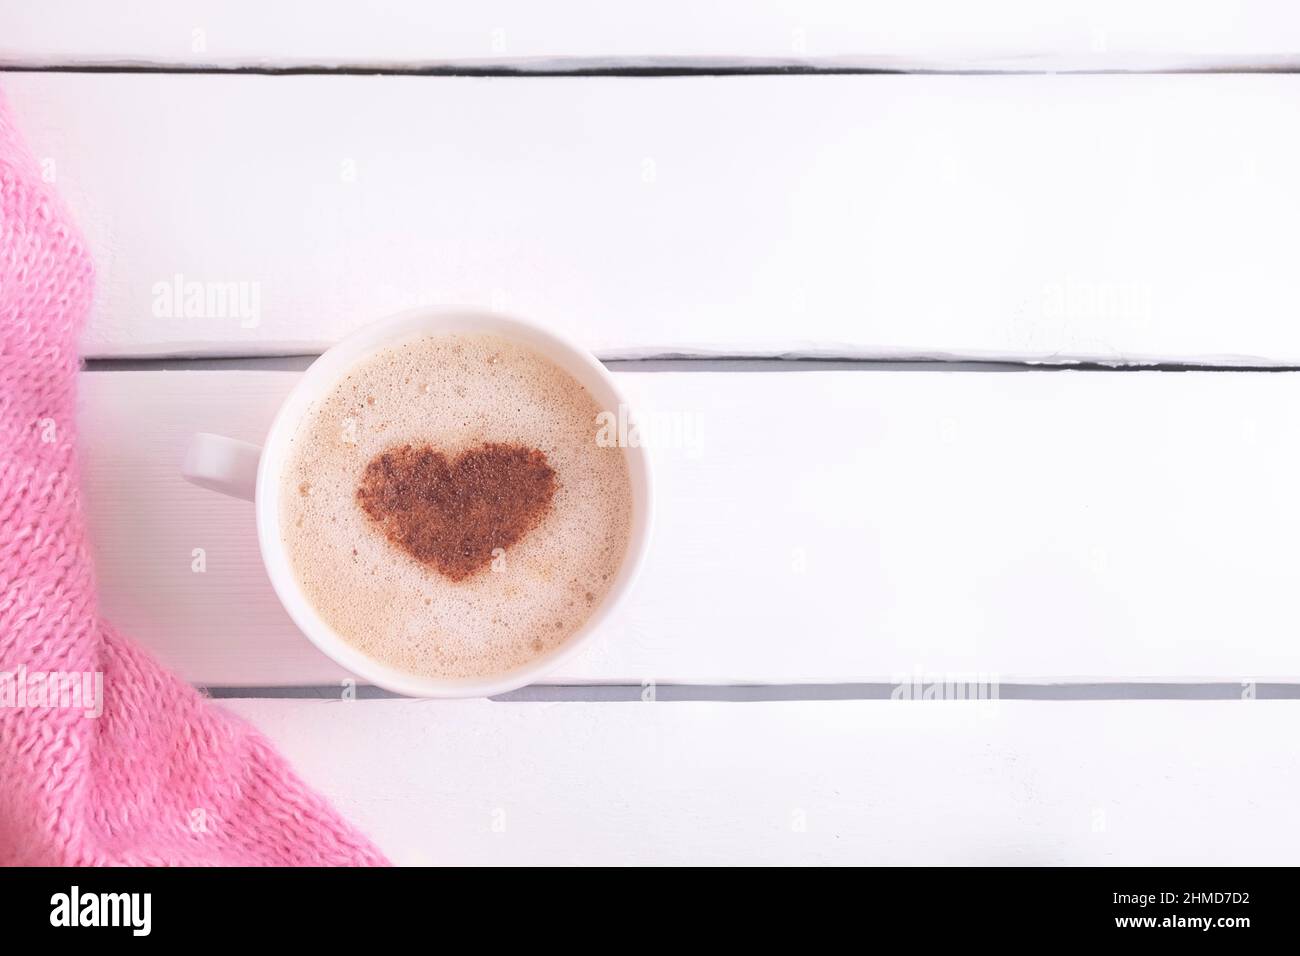 Romantic composition with coffee mug with cinnamon heart shape on white wooden table with space for text, top view. St. Valentines Day Stock Photo